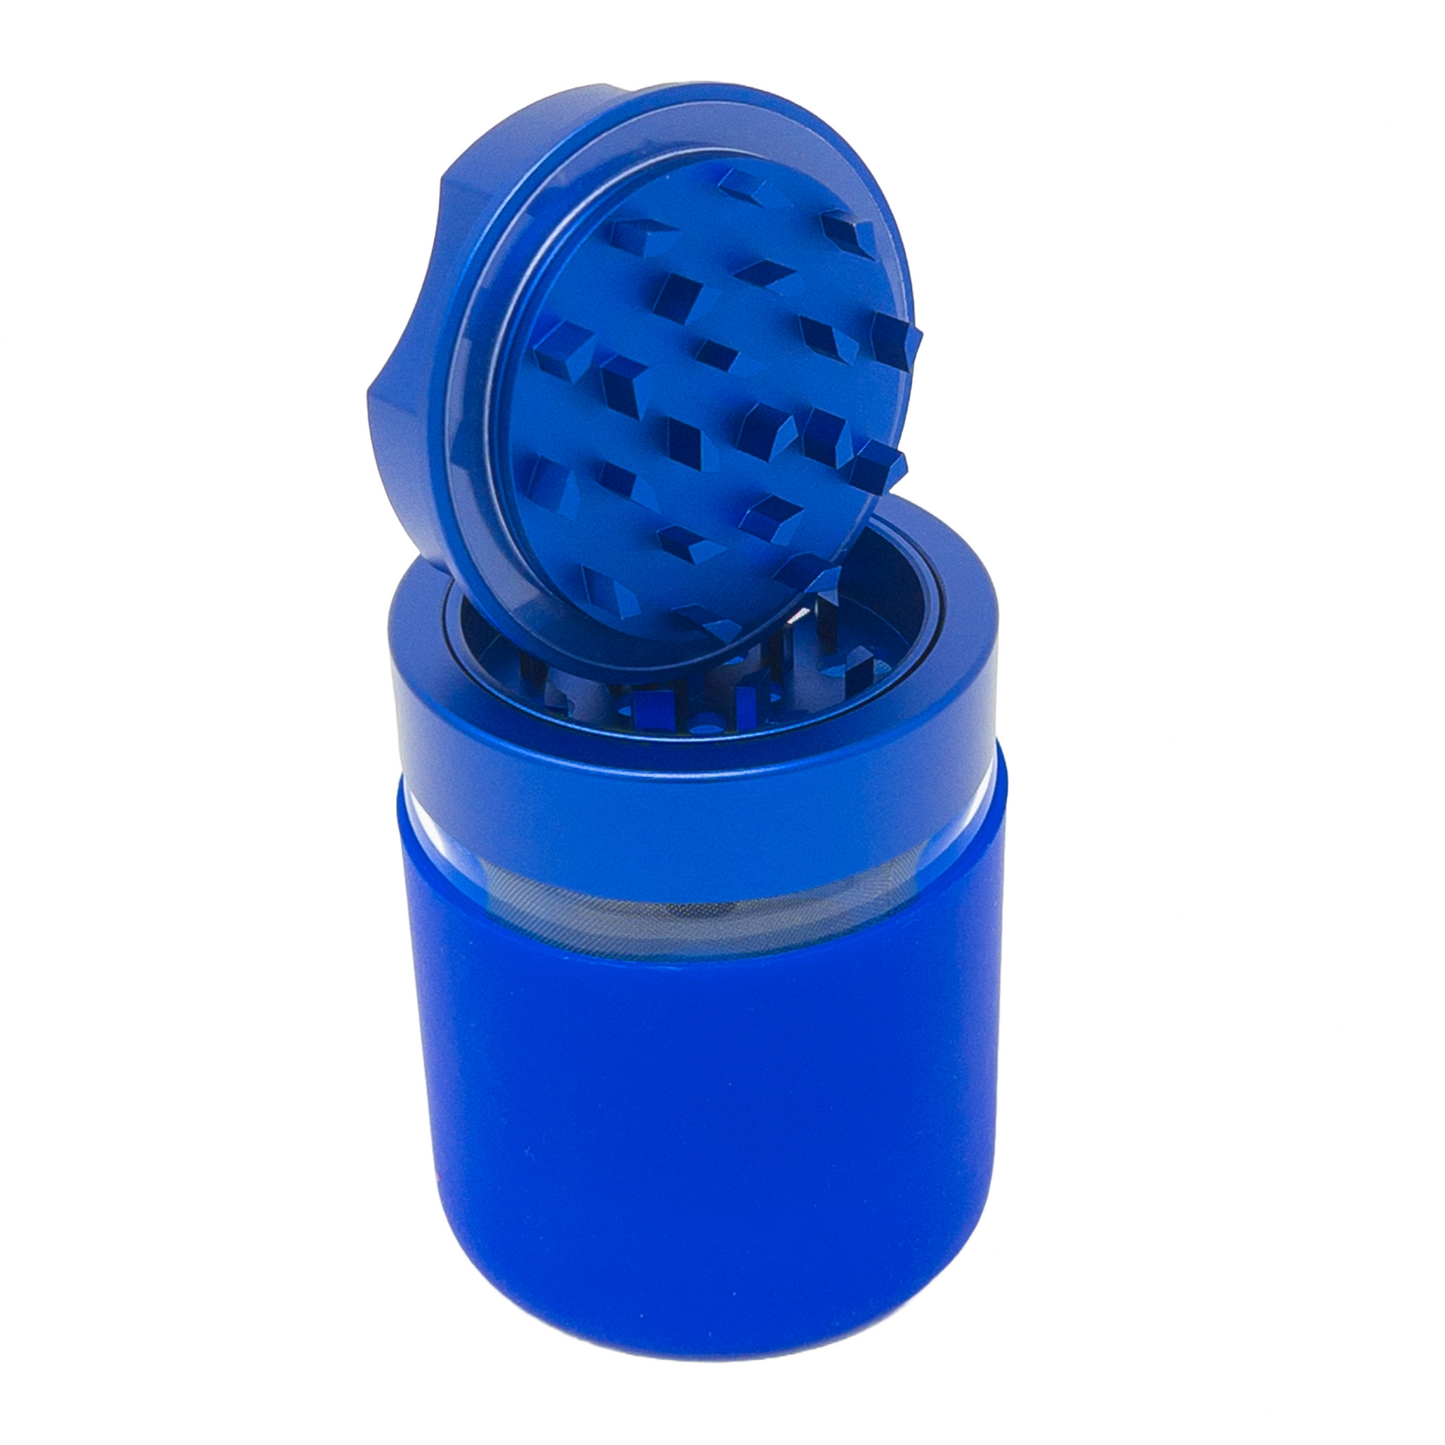 Glass Herb Grinder with screen, 60mm